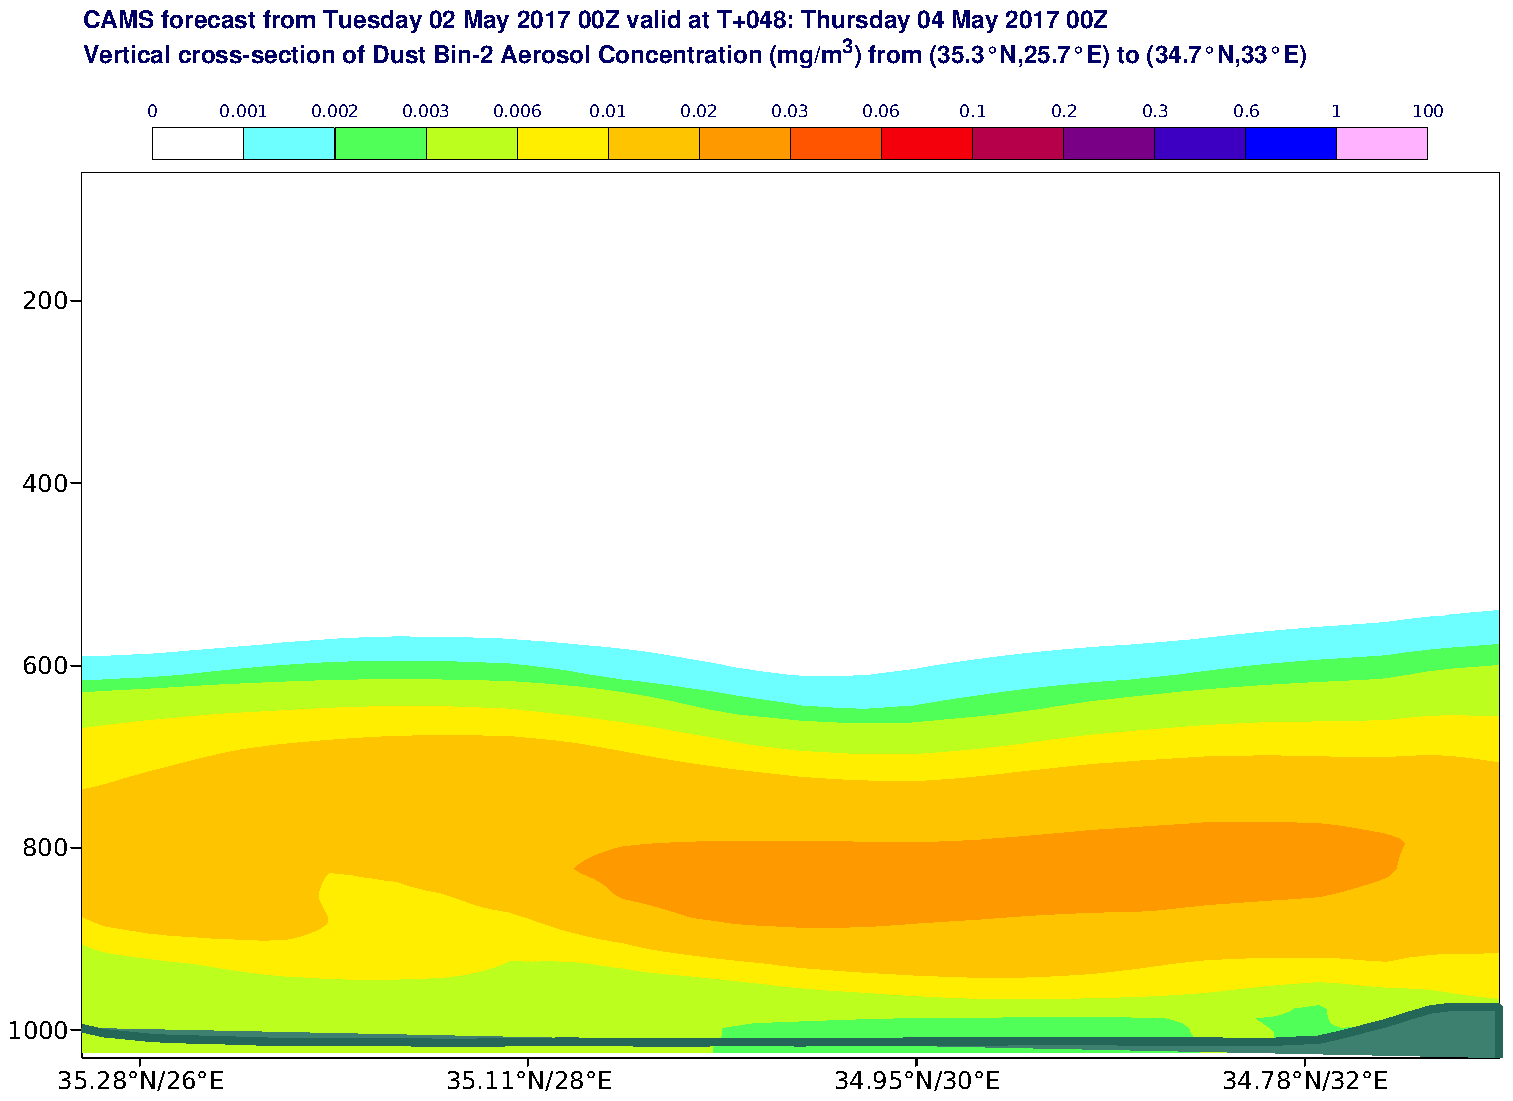 Vertical cross-section of Dust Bin-2 Aerosol Concentration (mg/m3) valid at T48 - 2017-05-04 00:00